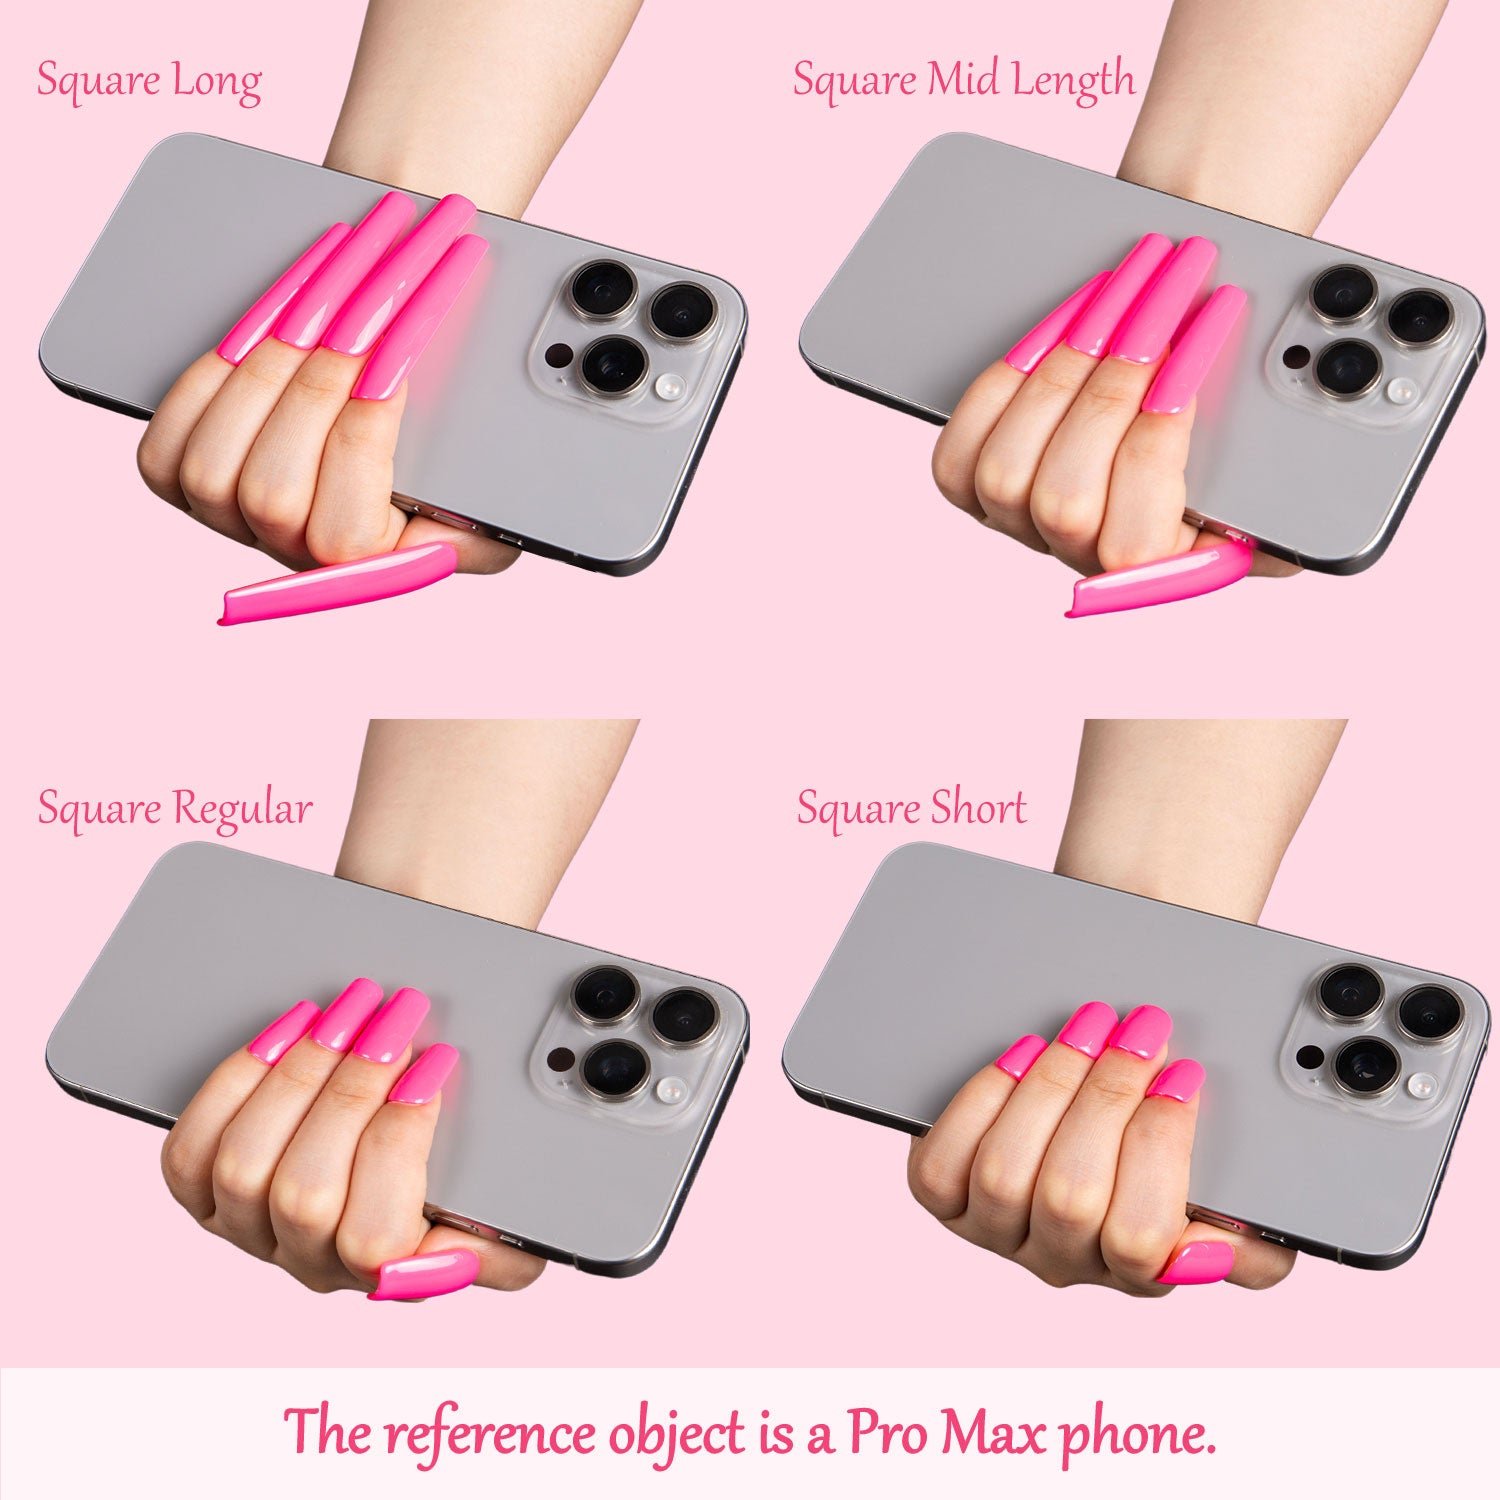 Comparison of four pink press-on square nails of varying lengths (Long, Mid Length, Regular, Short) holding a Pro Max phone